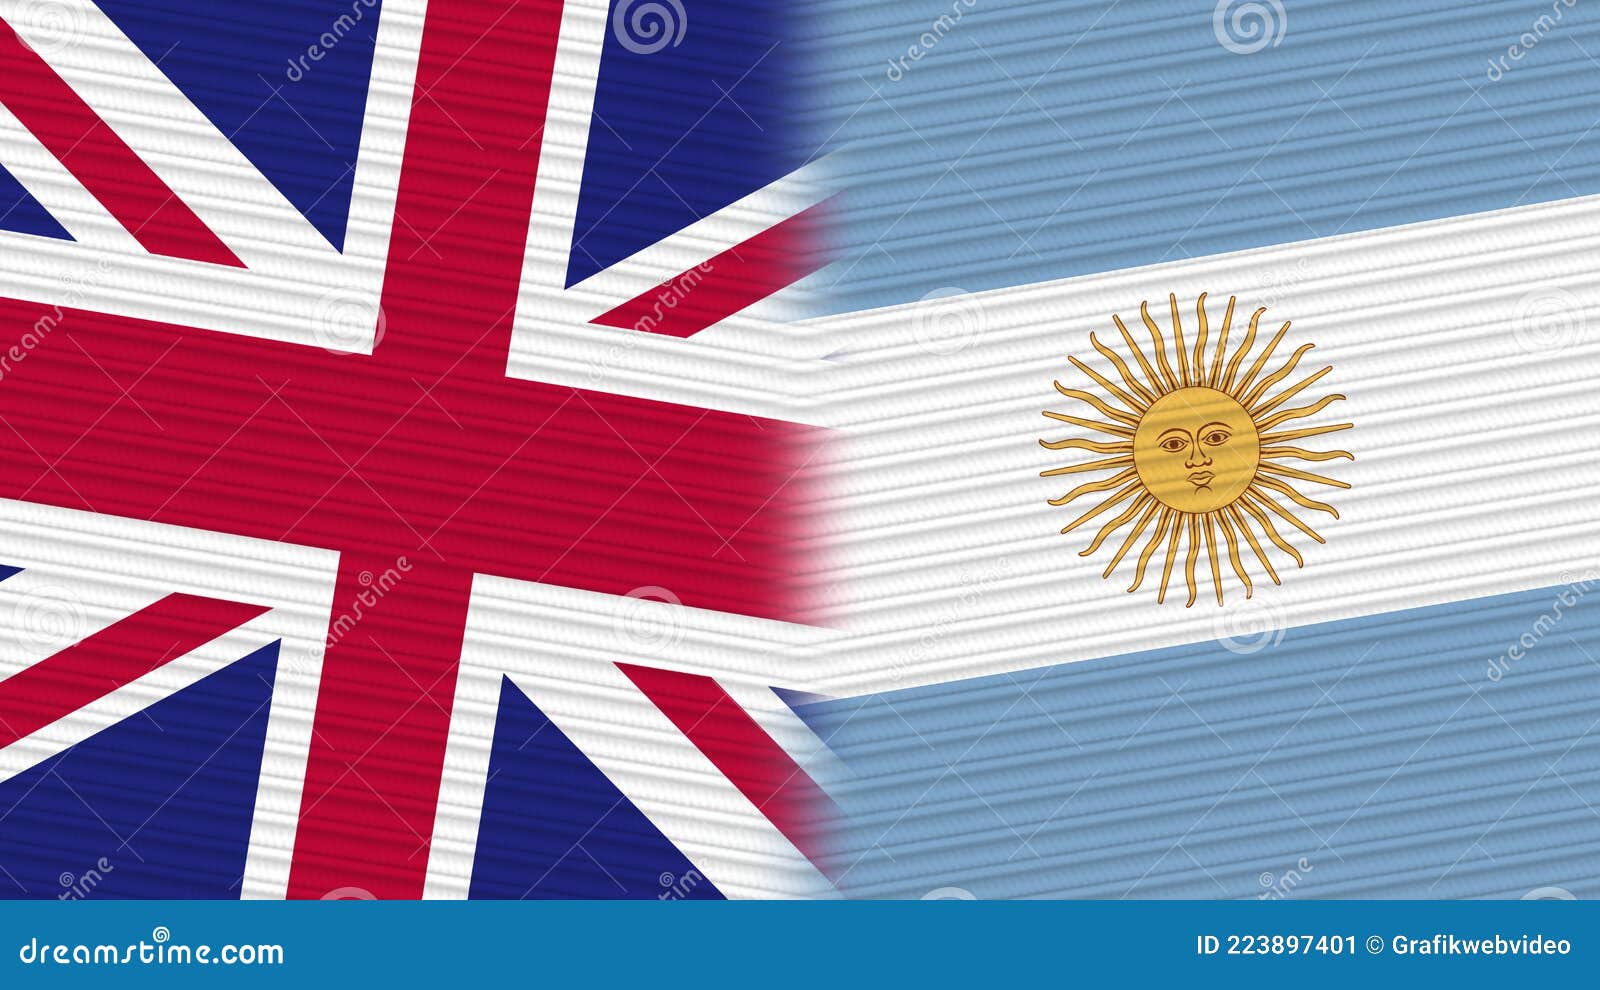 Argentina and United Kingdom Flags Together Fabric Texture Stock ...